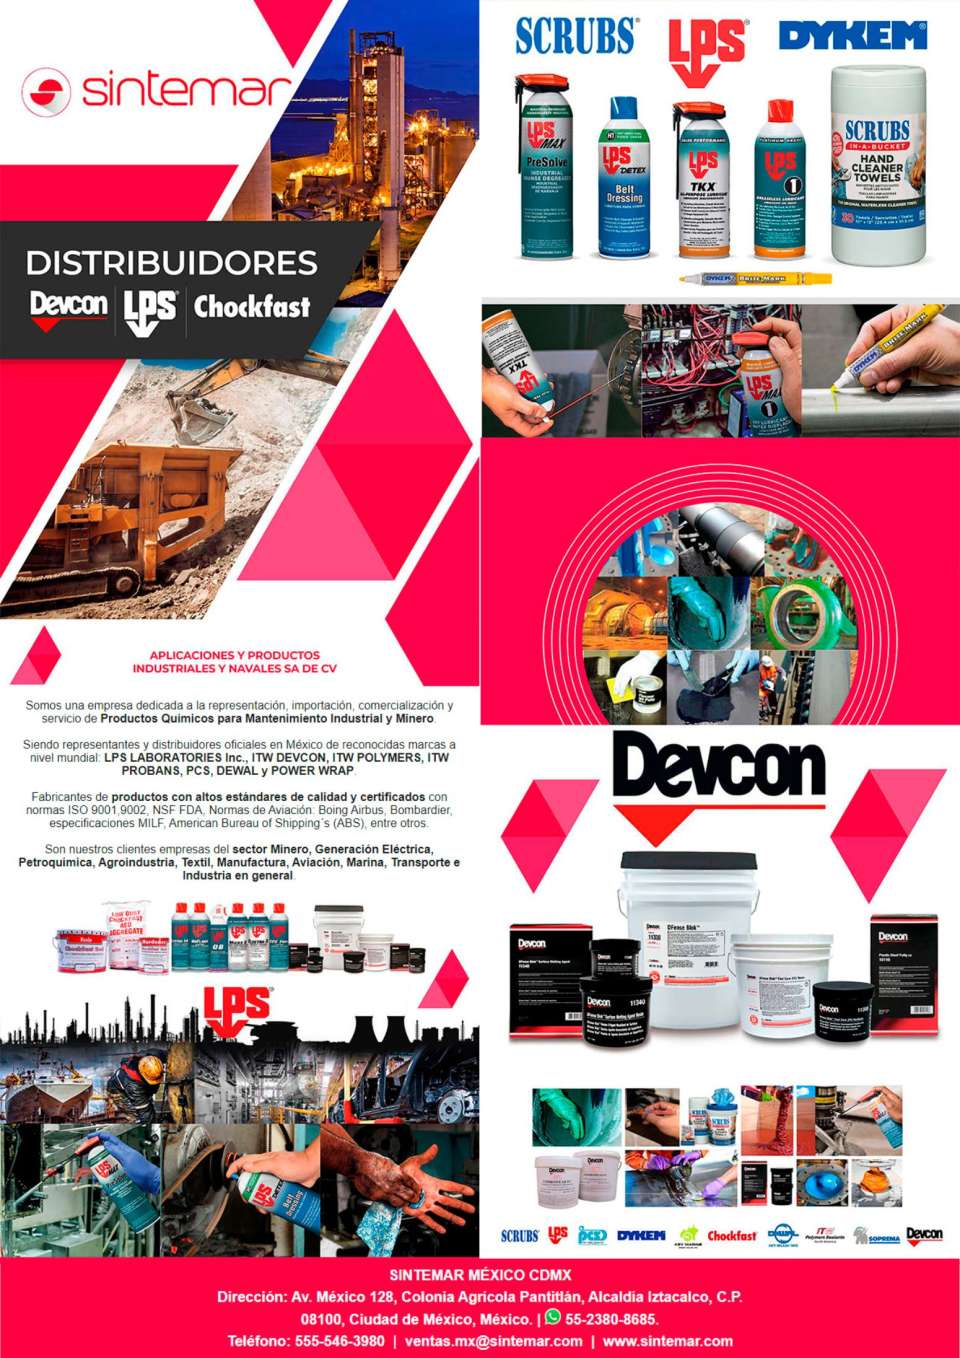 Chemical Products for Industrial and Mining Maintenance. Distributors in Mexico of recognized brands worldwide:LPS LABORATORIES Inc., ITW DEVCON, ITW POLYMERS, ITW PROBANS, PCS, DEWAL and POWER WRAP.